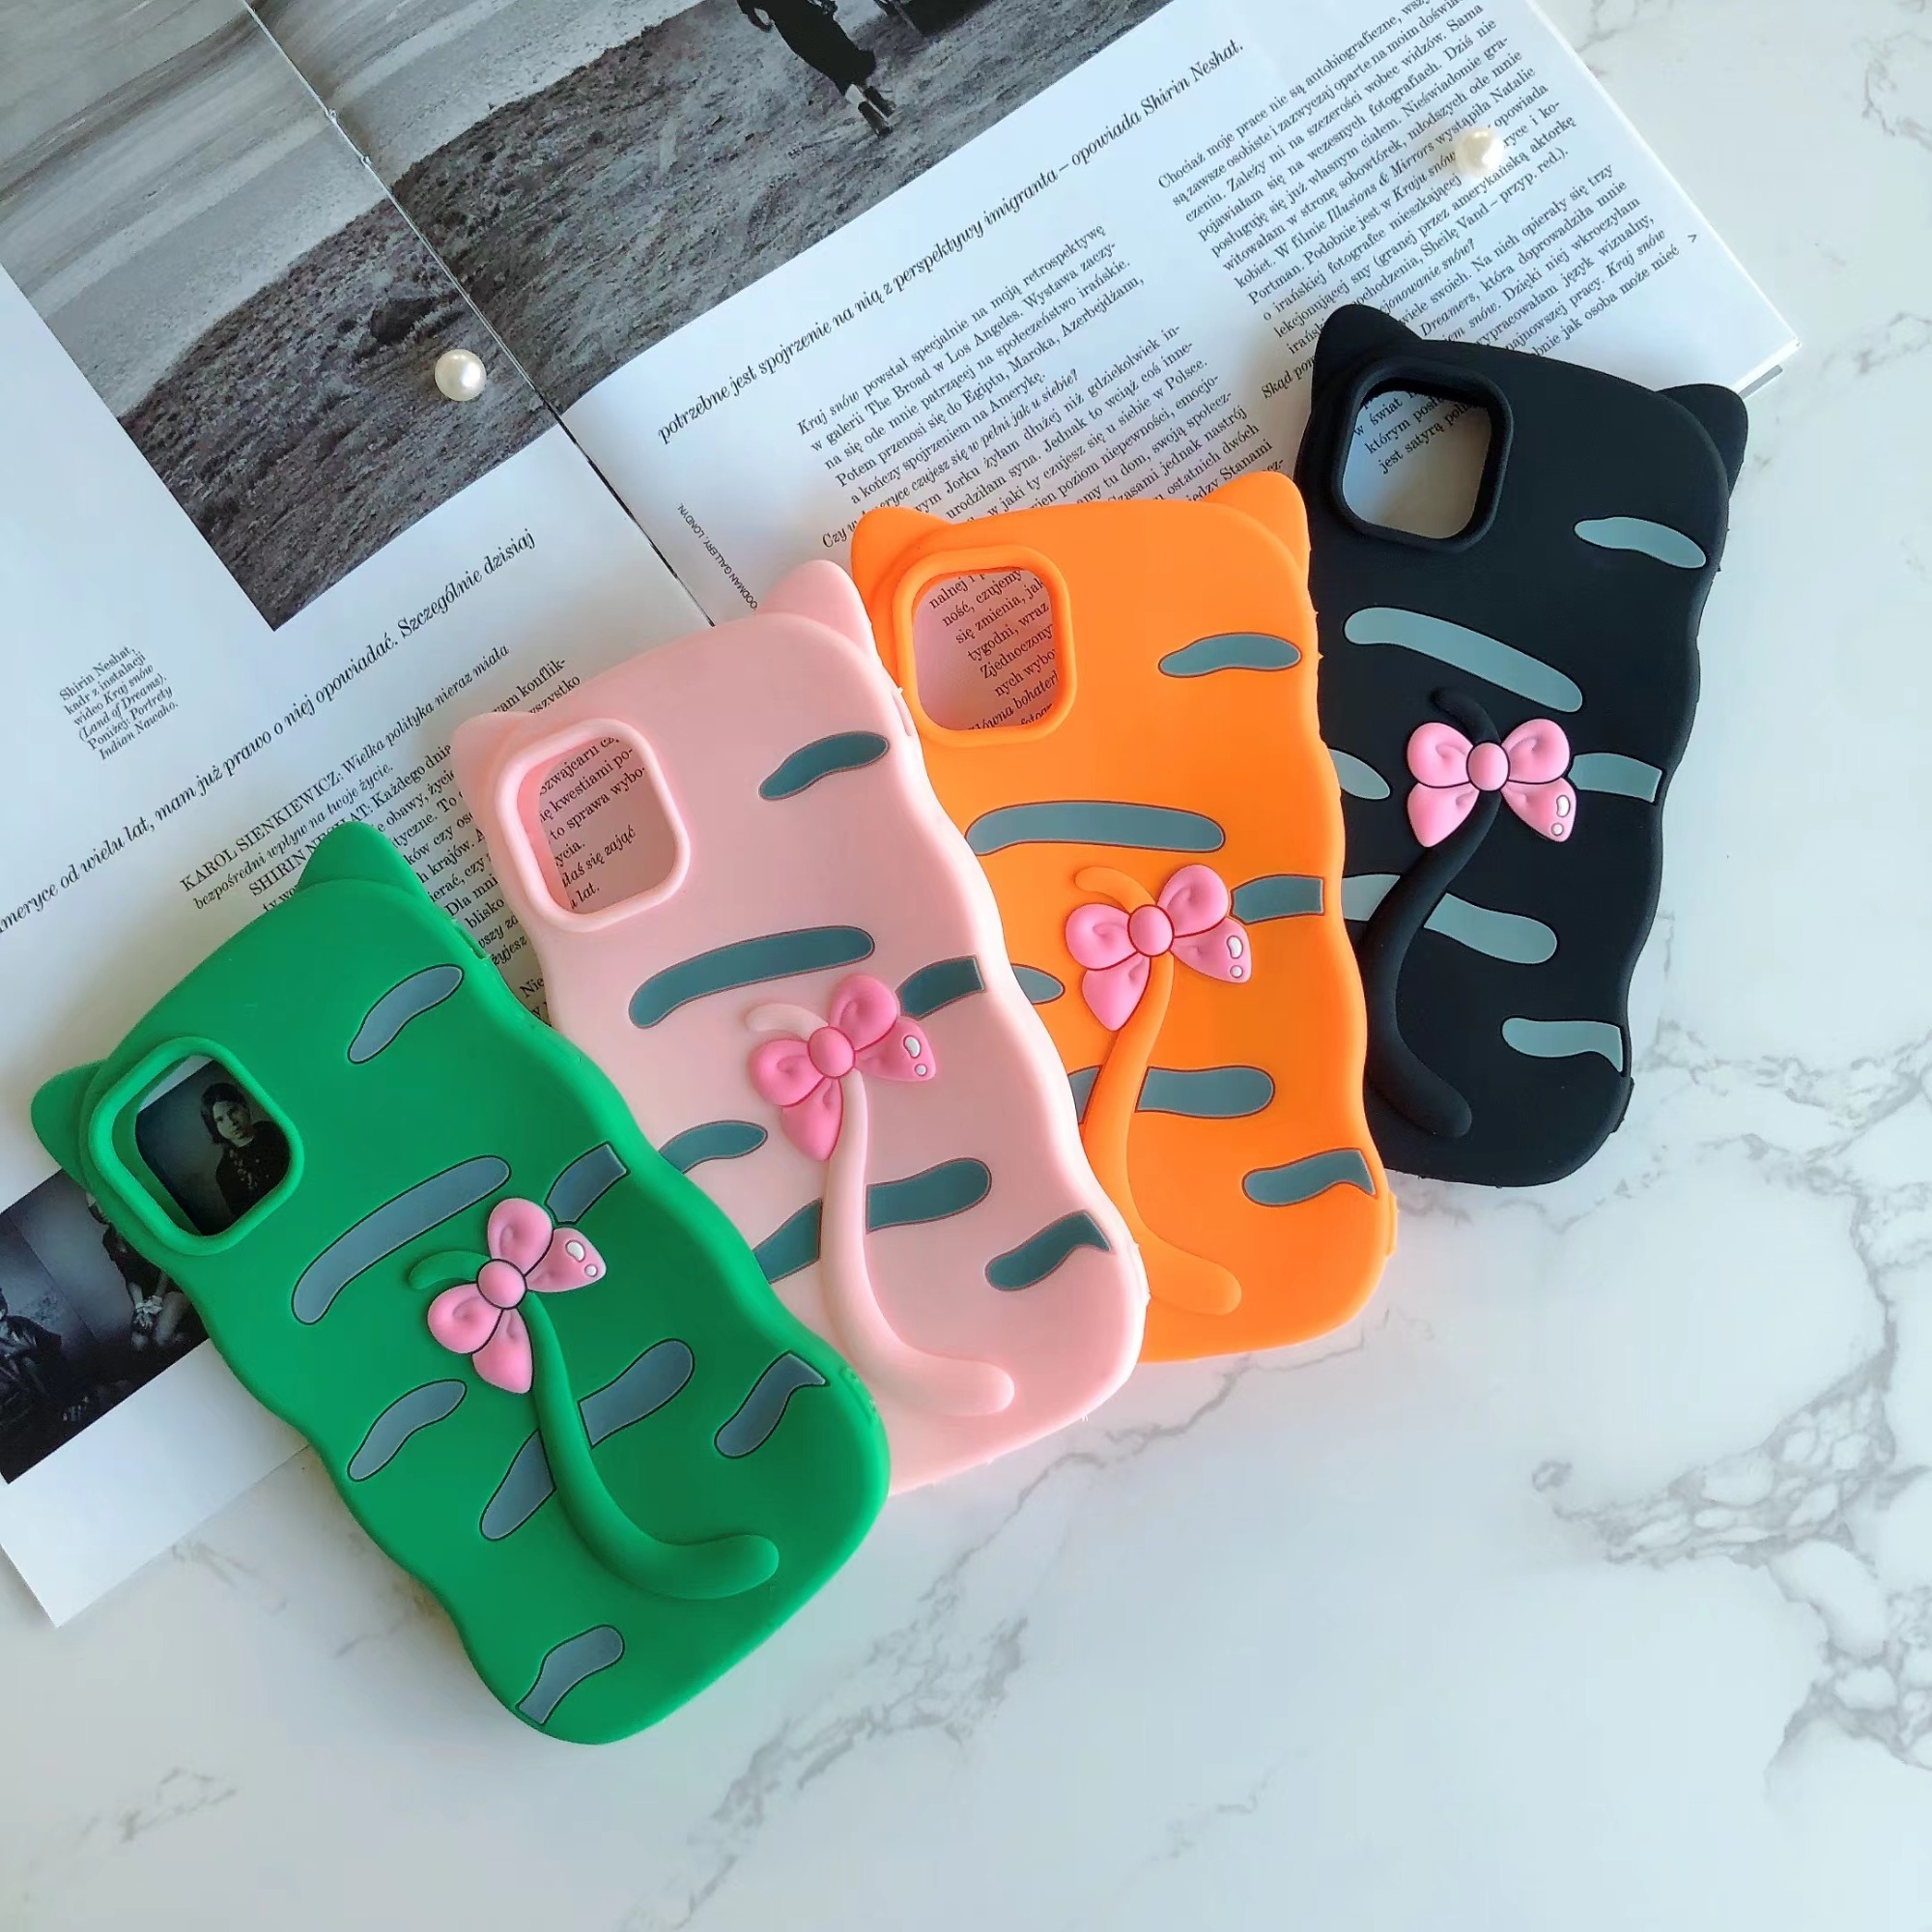 New design and high quality cute silicone for ITEL S16 S17 A16 A56 phone case